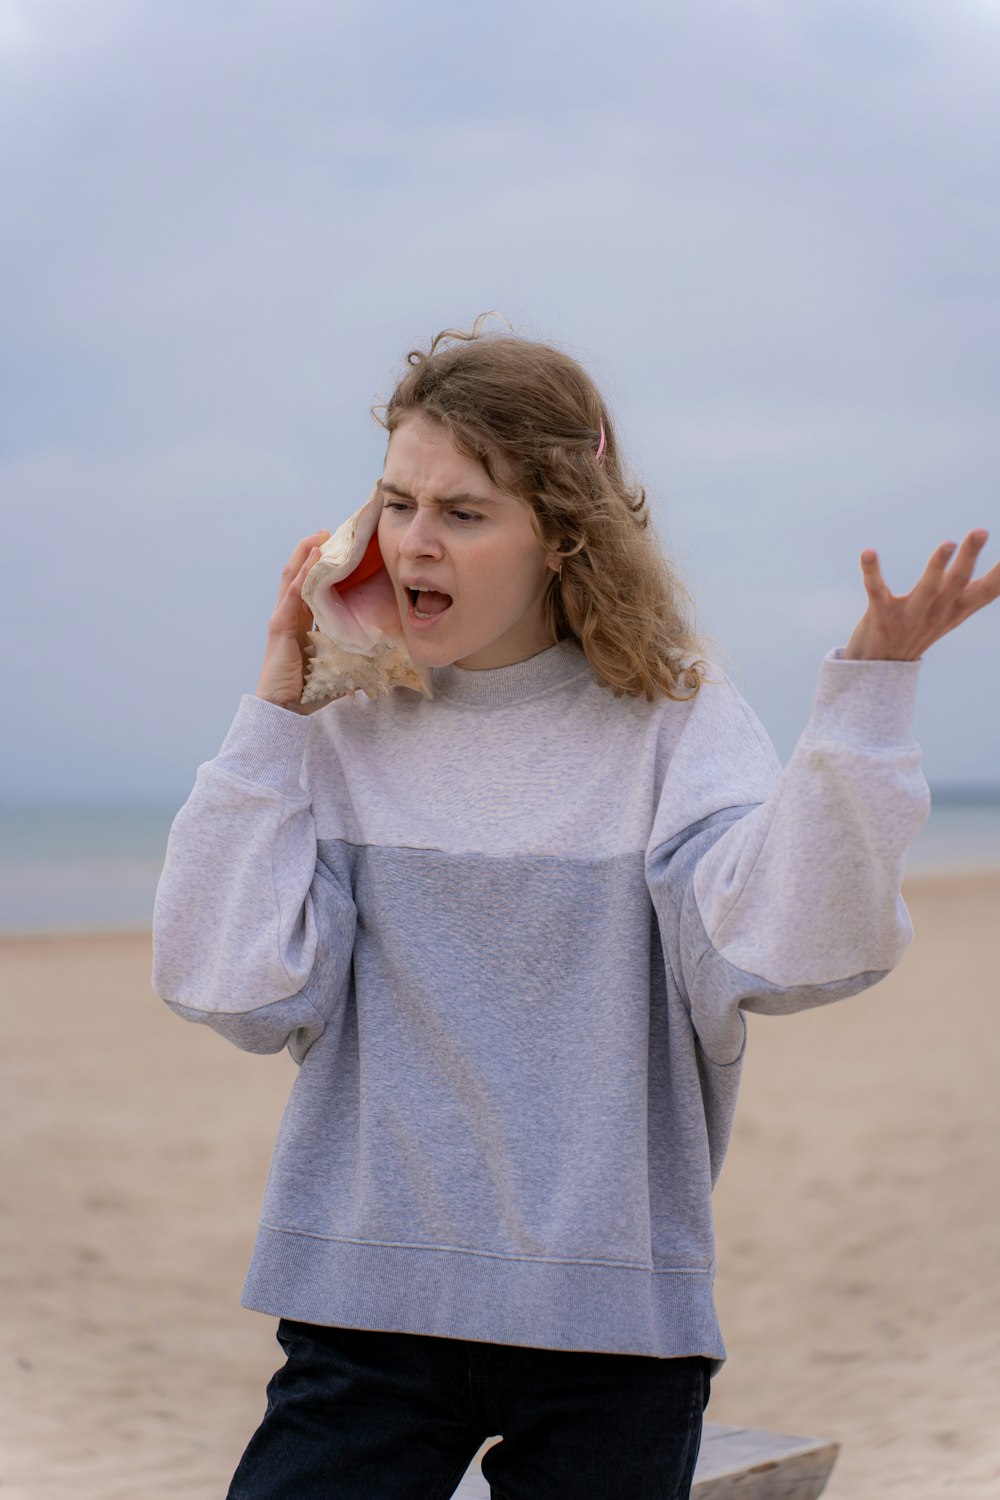 a woman on the beach holding a cell phone to her ear